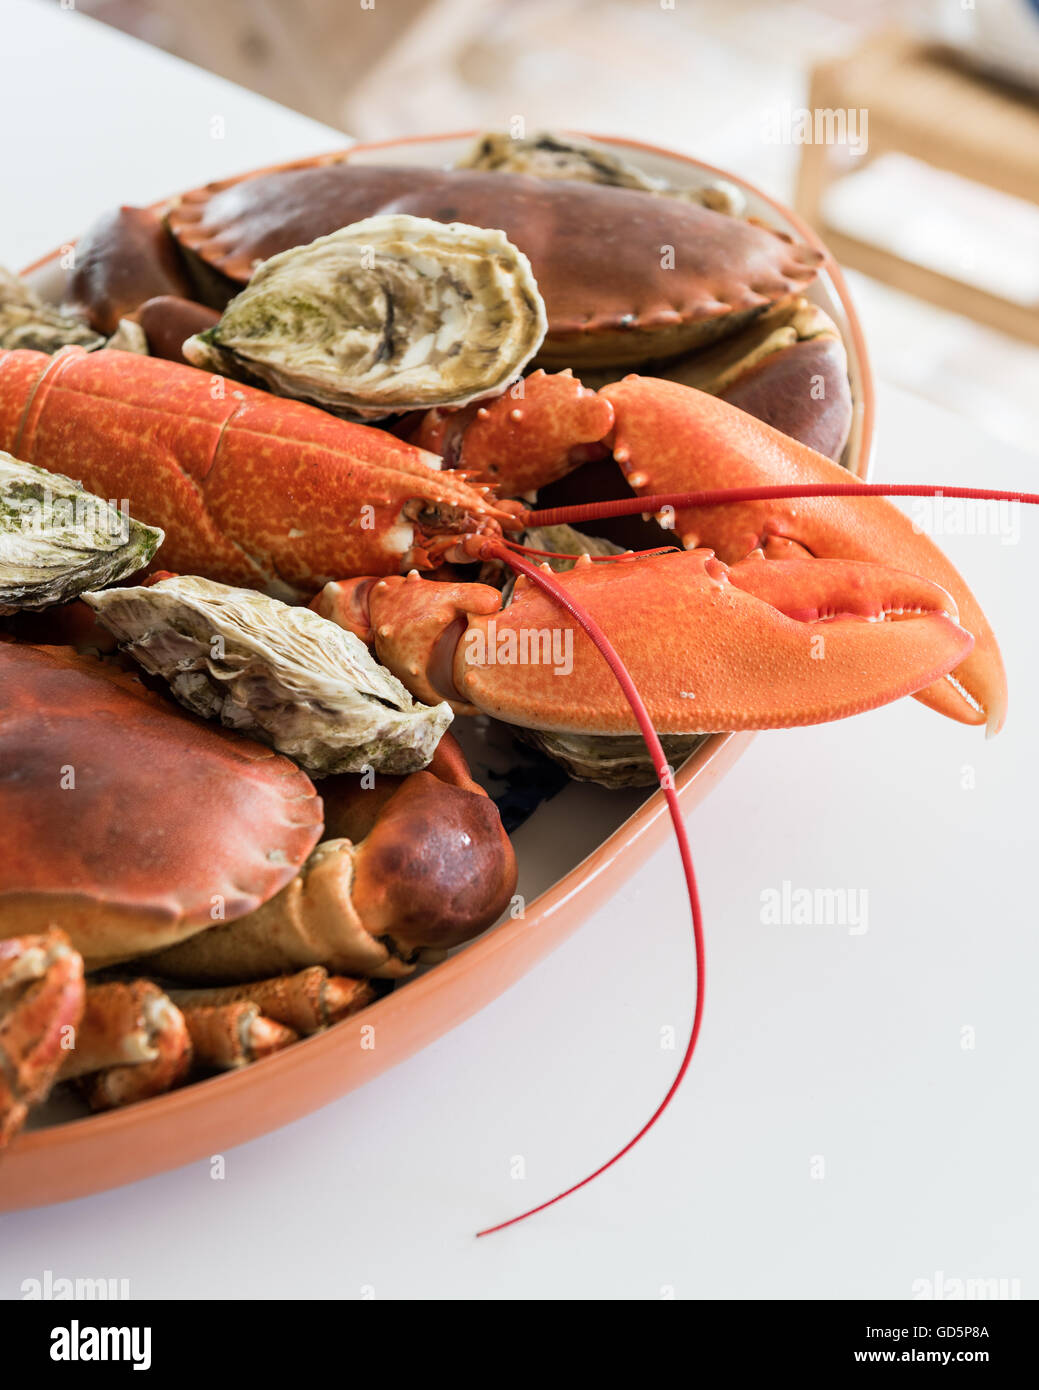 Lobster, crab and oyster platter Stock Photo